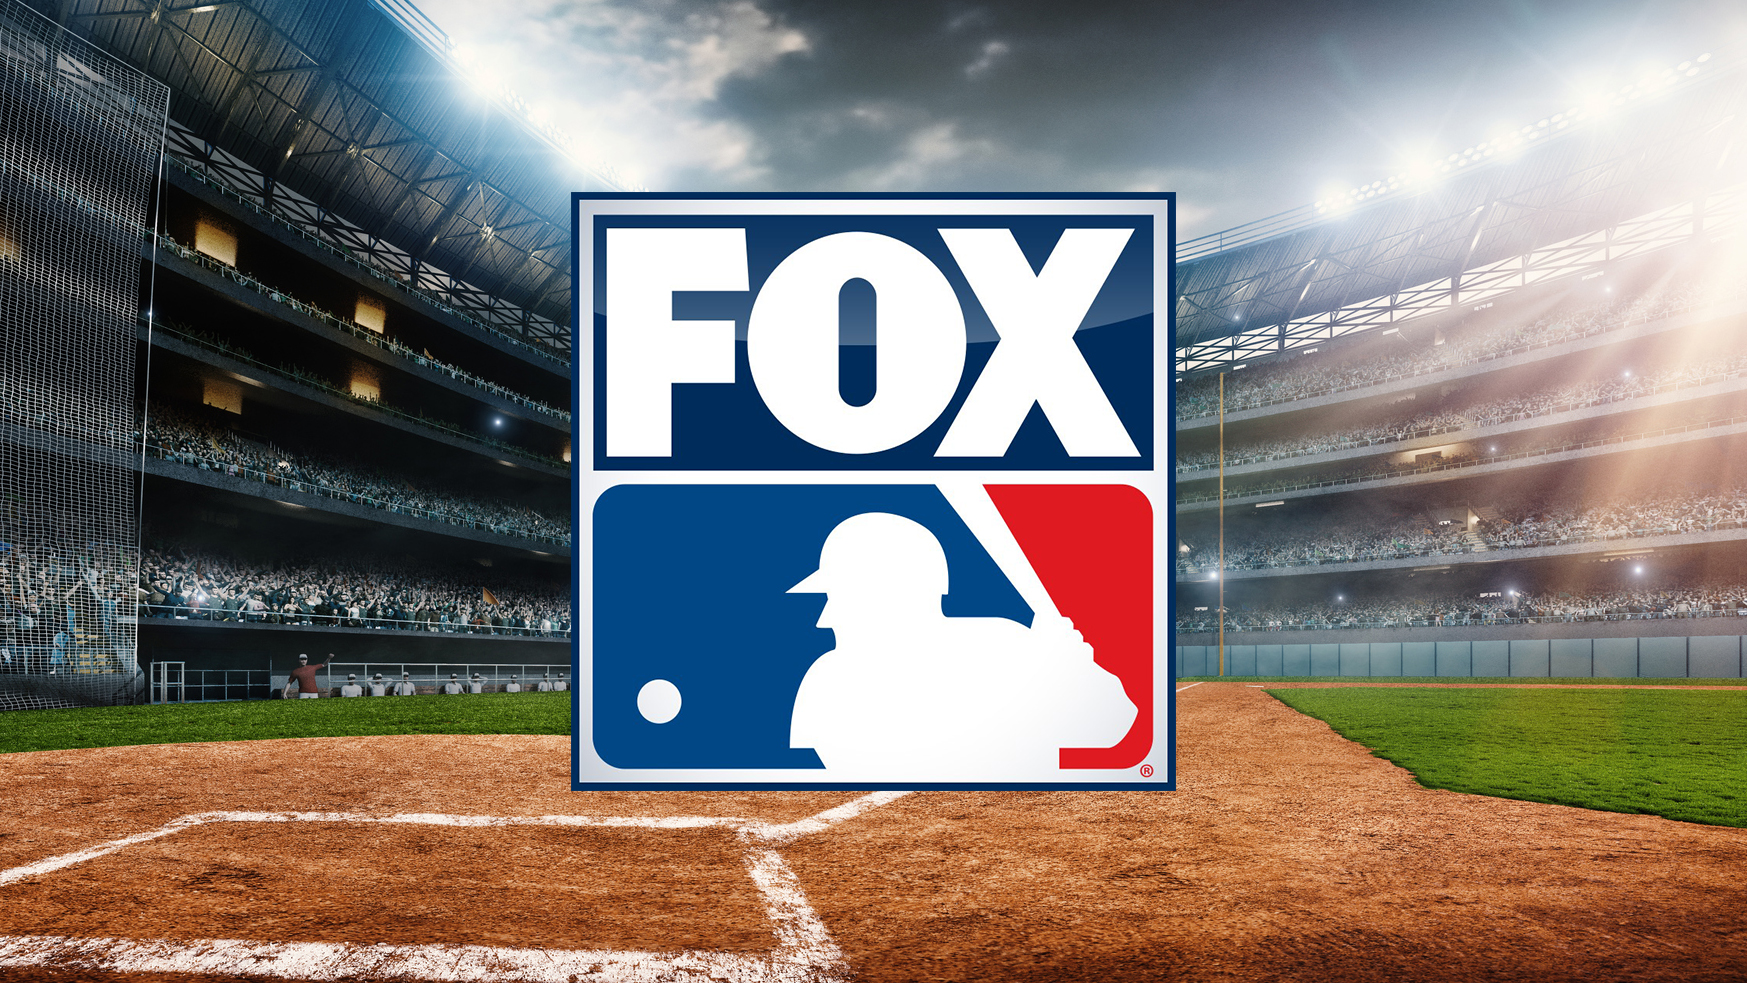 With virtual fans Fox hopes to liven up MLBs empty stadiums  KCRW